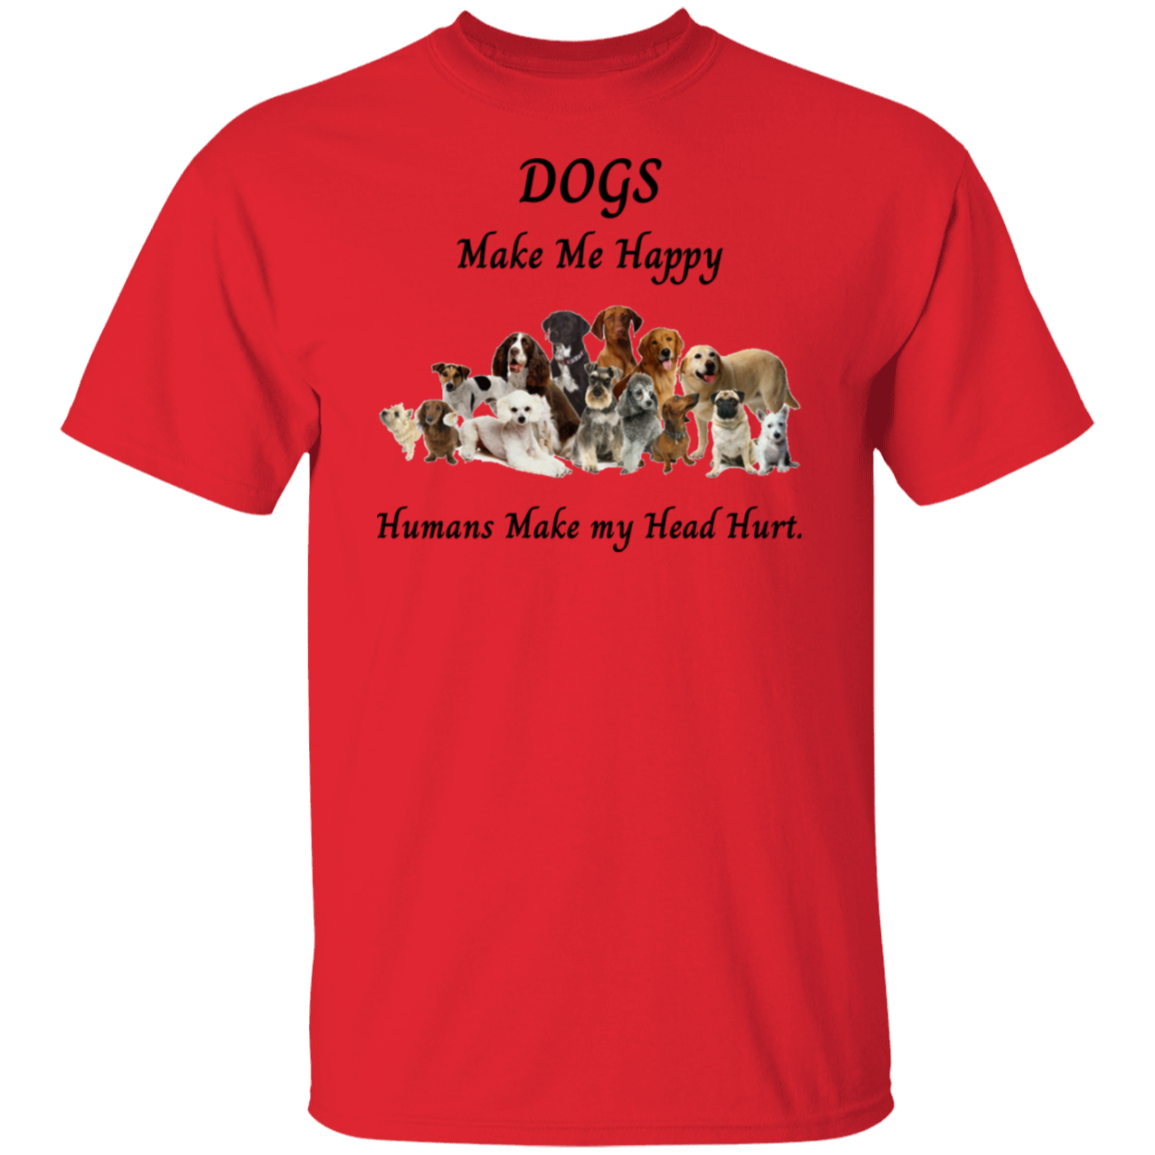 Dogs Make Me Happy and Humans make my head hurt T-Shirt